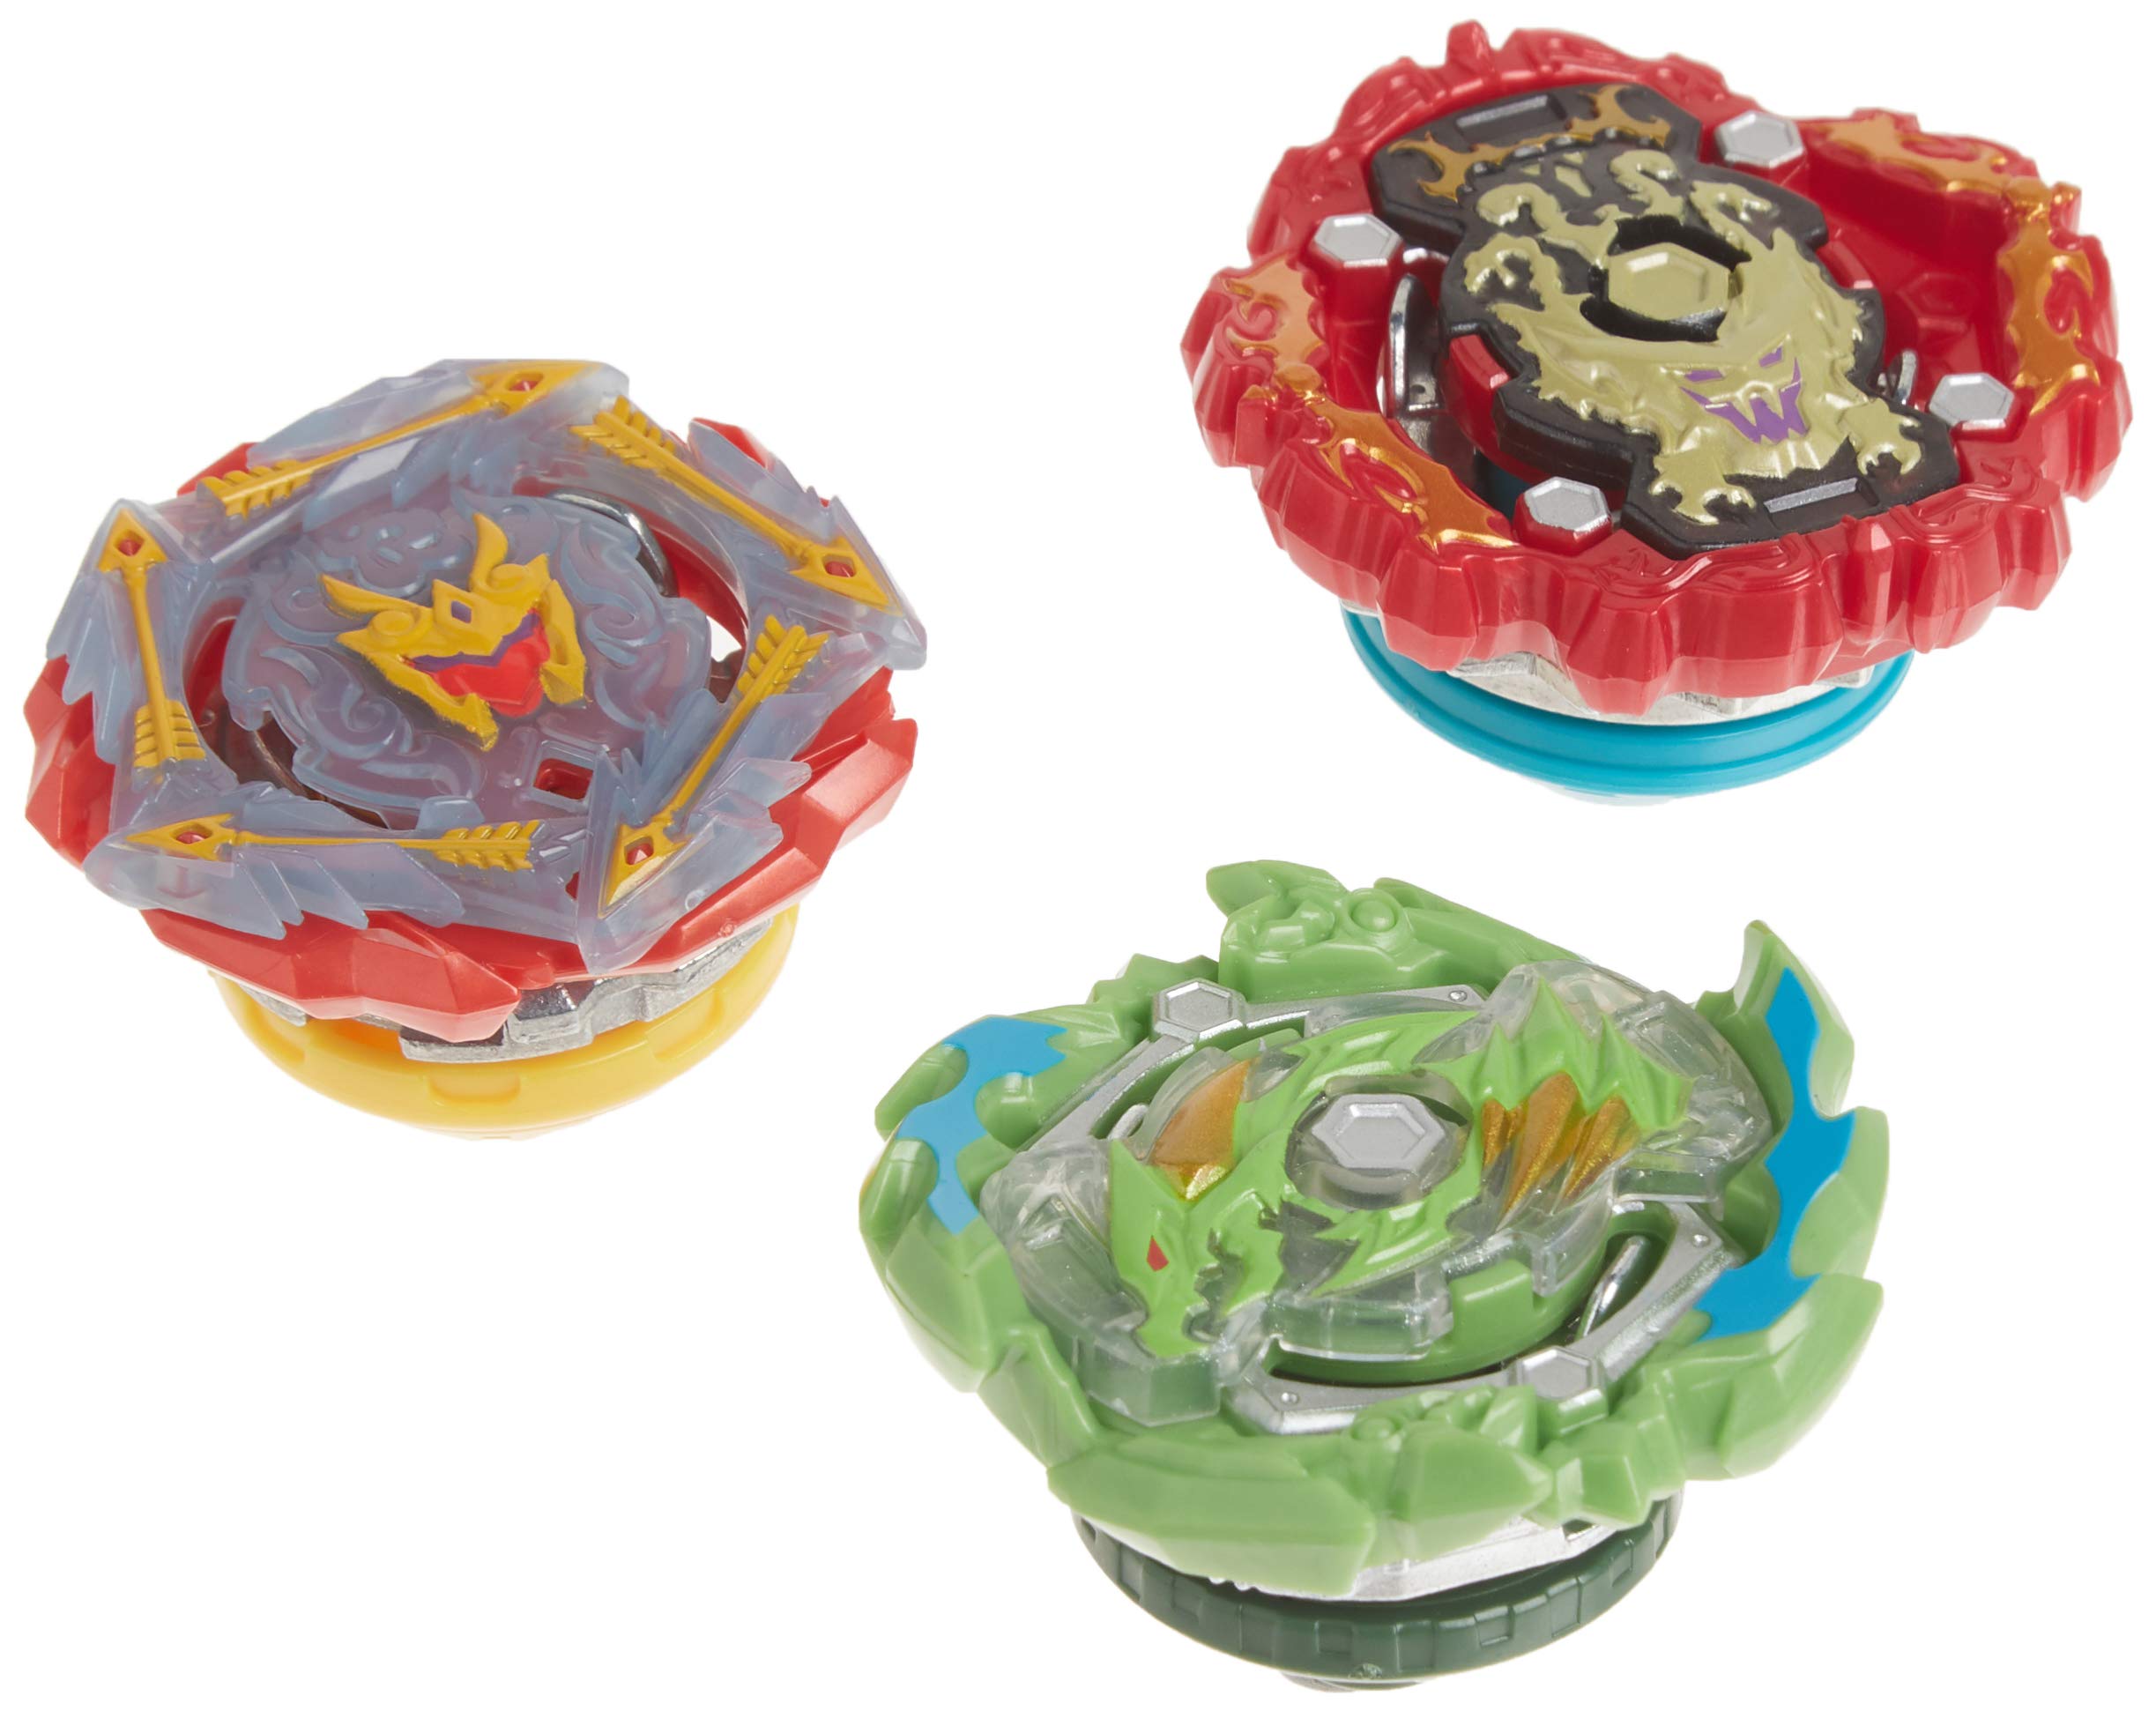 BEYBLADE Burst Rise Hypersphere Battle Heroes 3-Pack - Ace Dragon D5, Rudr R5, Viper Hydrax H5 Battling Game Tops, Toys Ages 8 and Up (Amazon Exclusive)